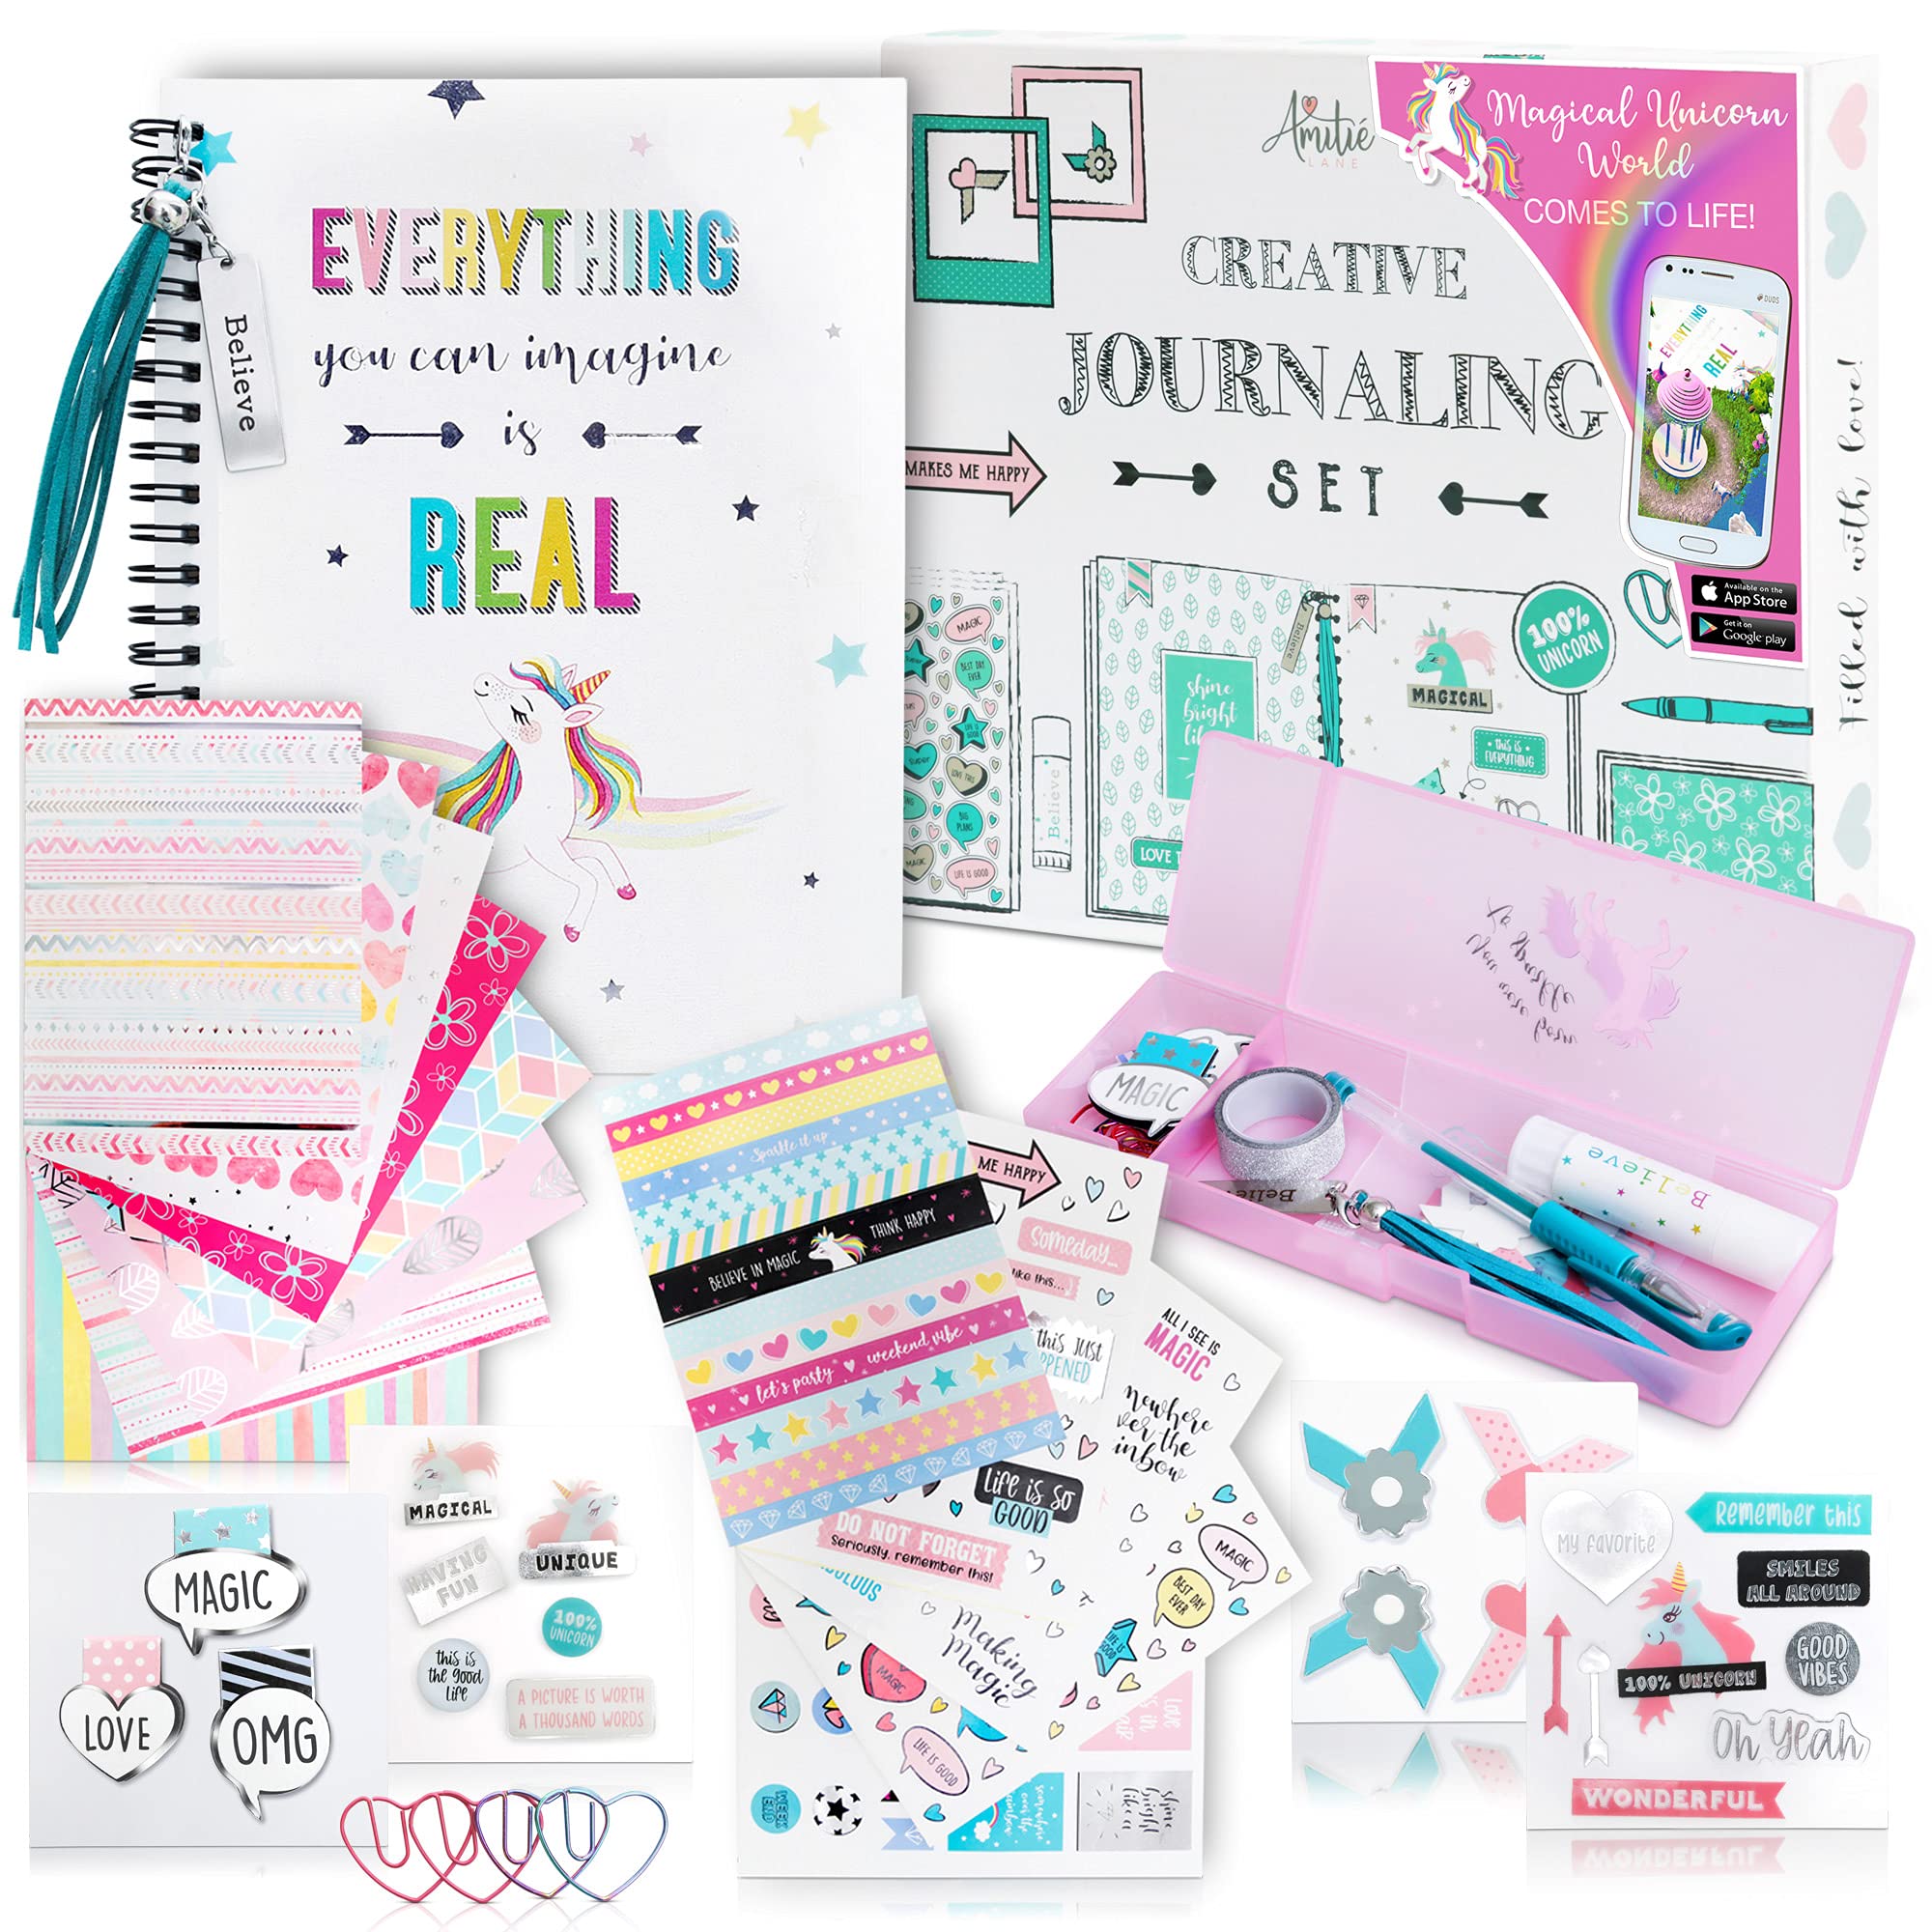 Unicorn Stationery Set for Girls - Unicorn Gifts for Girls Ages 6 7 8 9  10-12 Years Old - Stationary Letter Writing Kit - Unicorn Toys for 6 7 8  Year